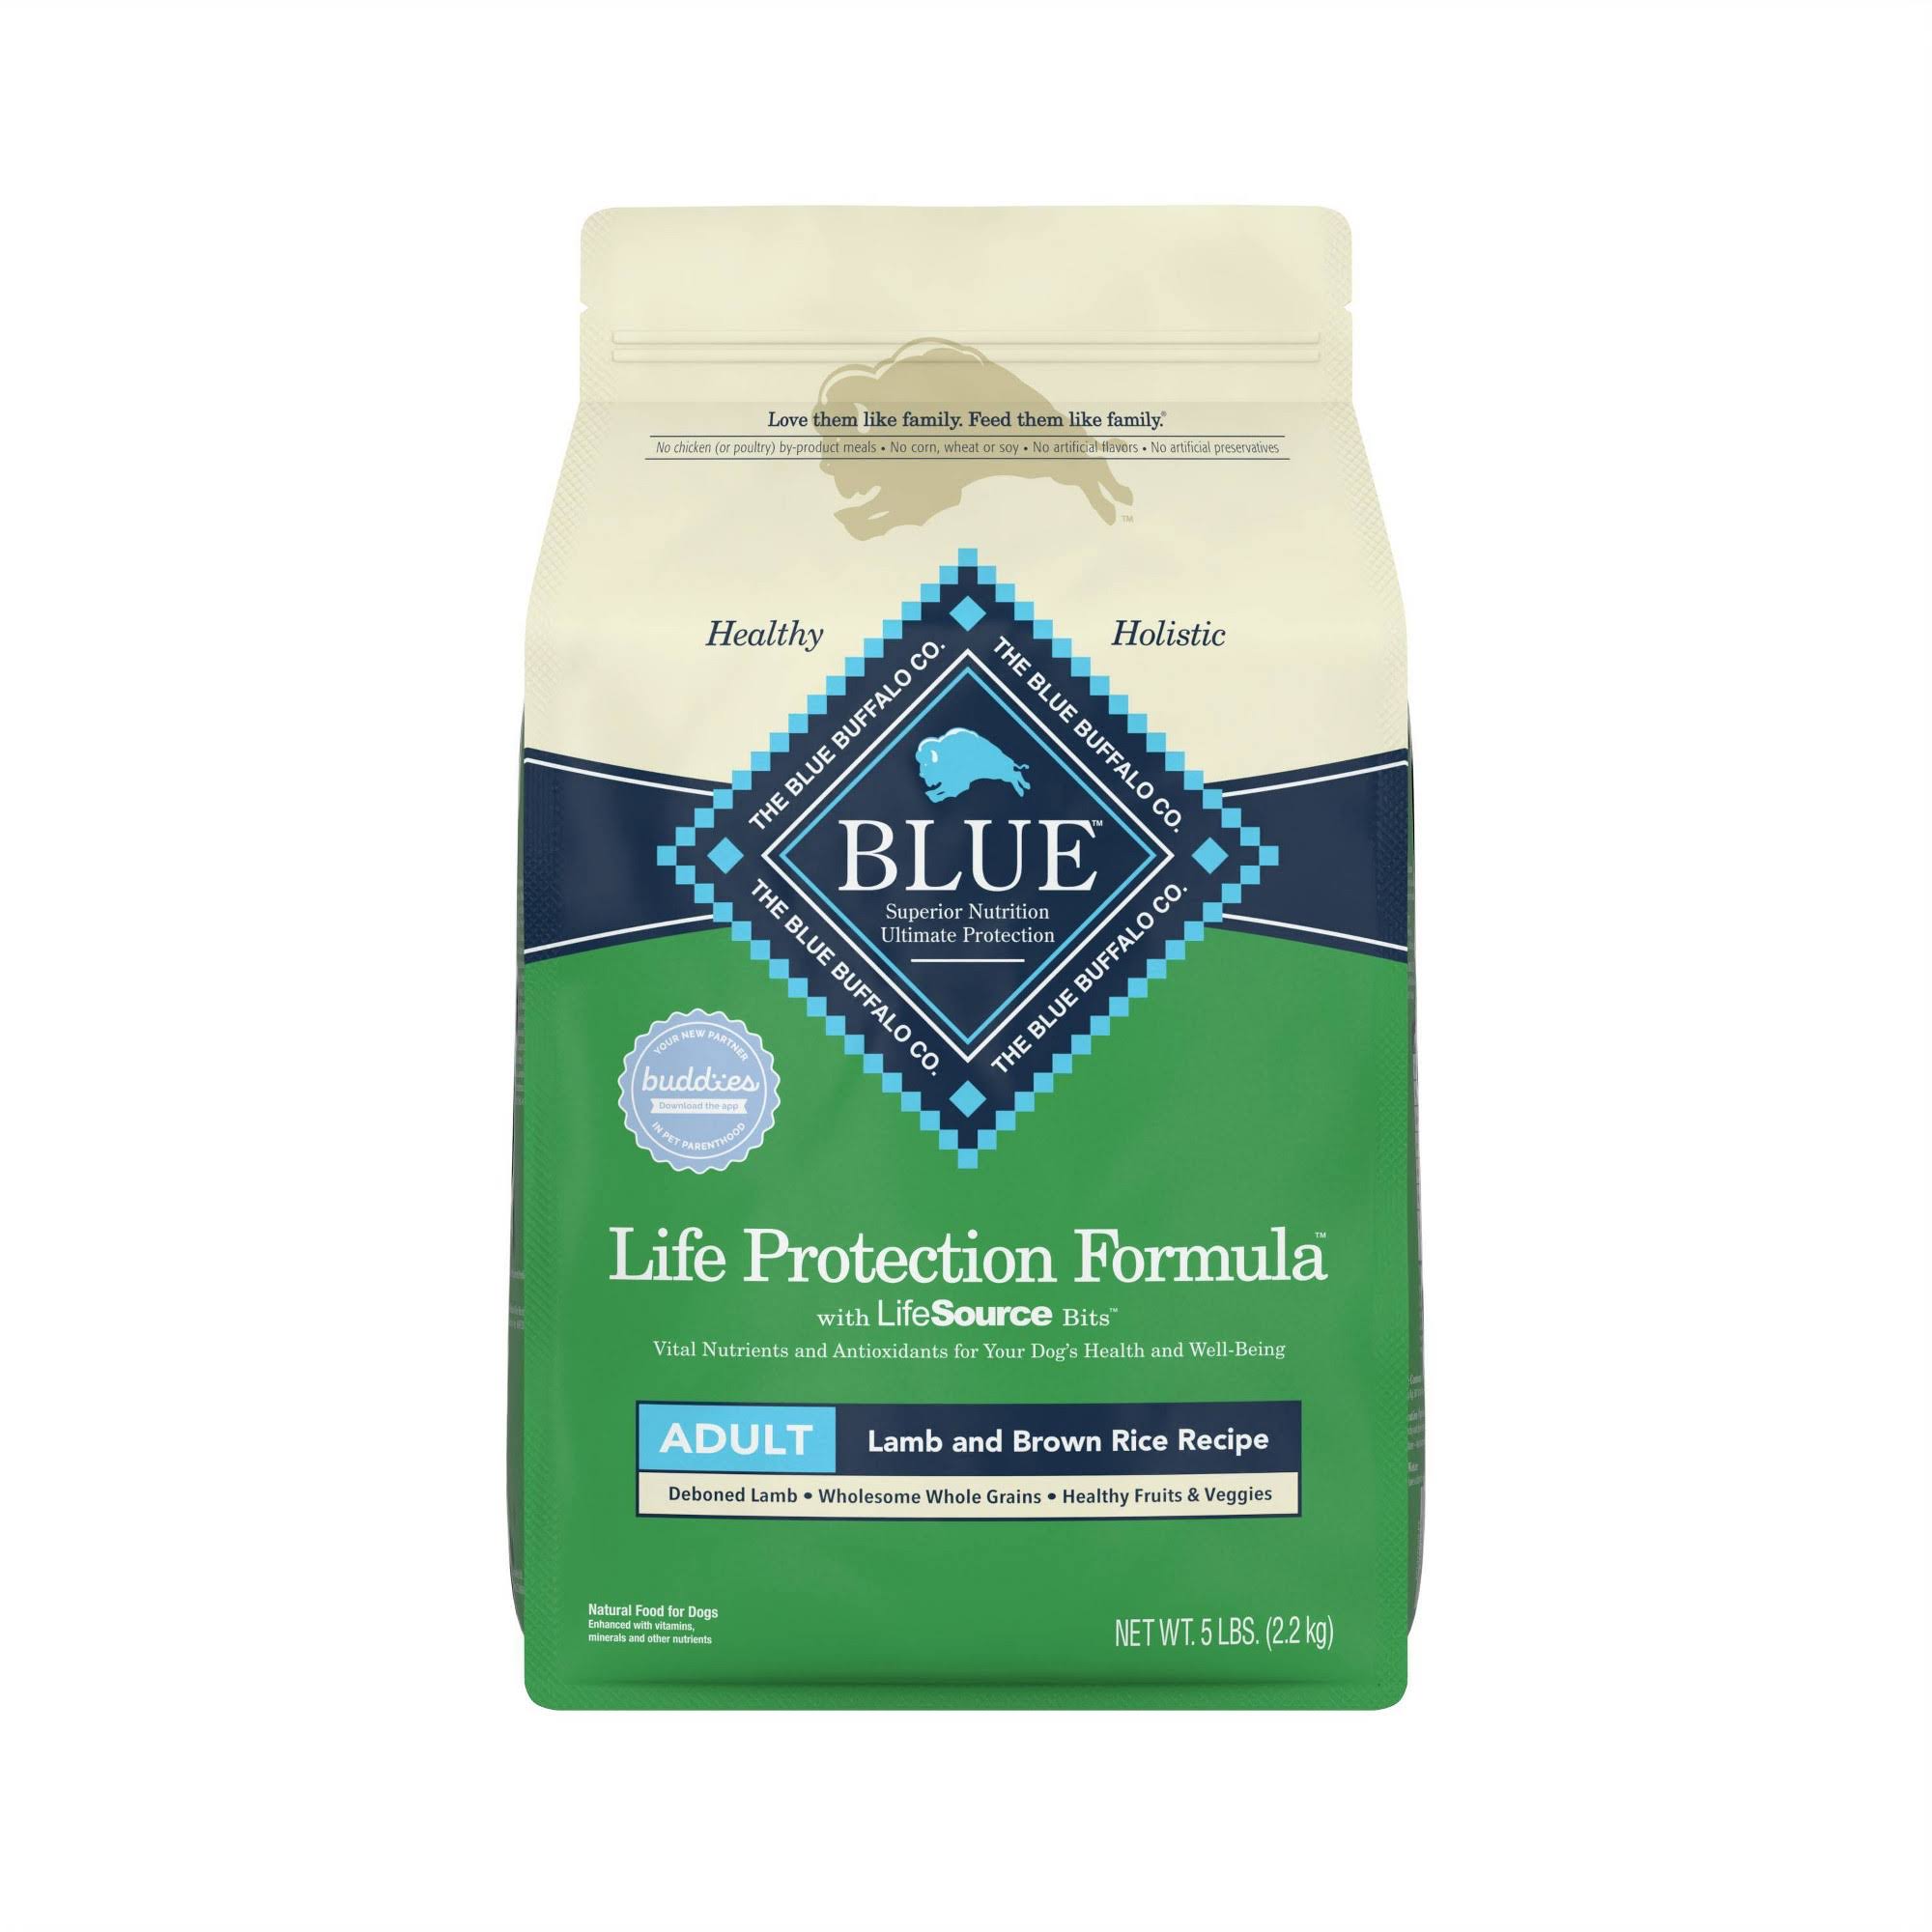 Blue Buffalo Blue Life Protection Formula Food for Dogs, Natural, Lamb and Brown Rice Recipe, Adult - 5 lbs (2.2 kg)